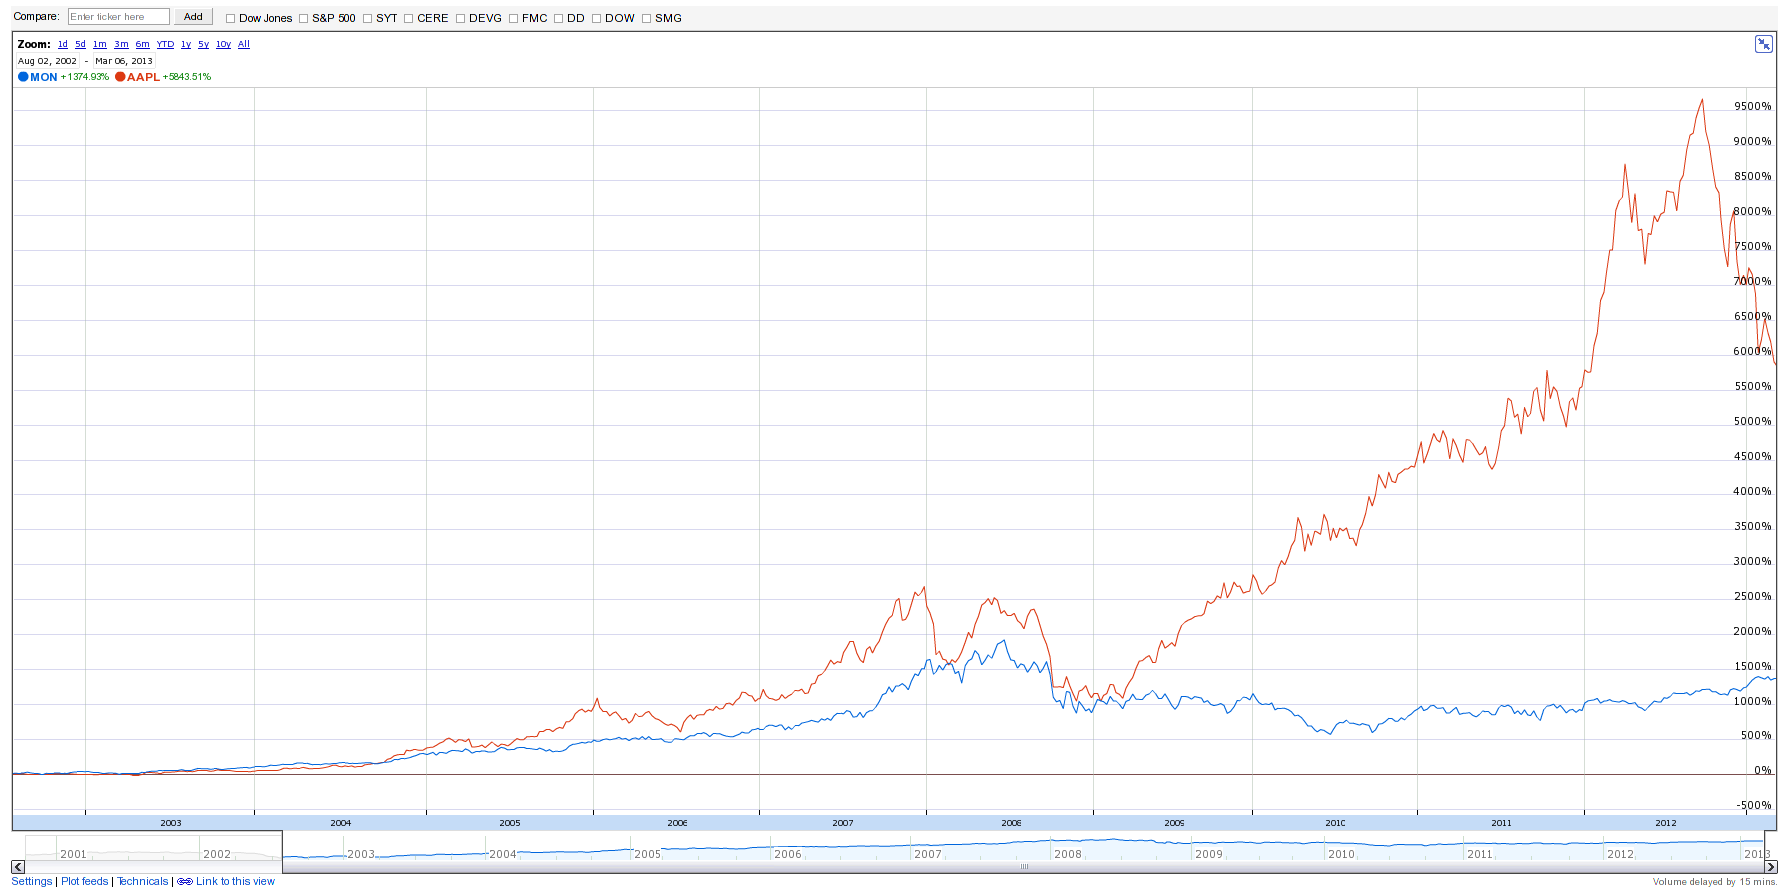 Apple and Monsanto stock price for the last decade